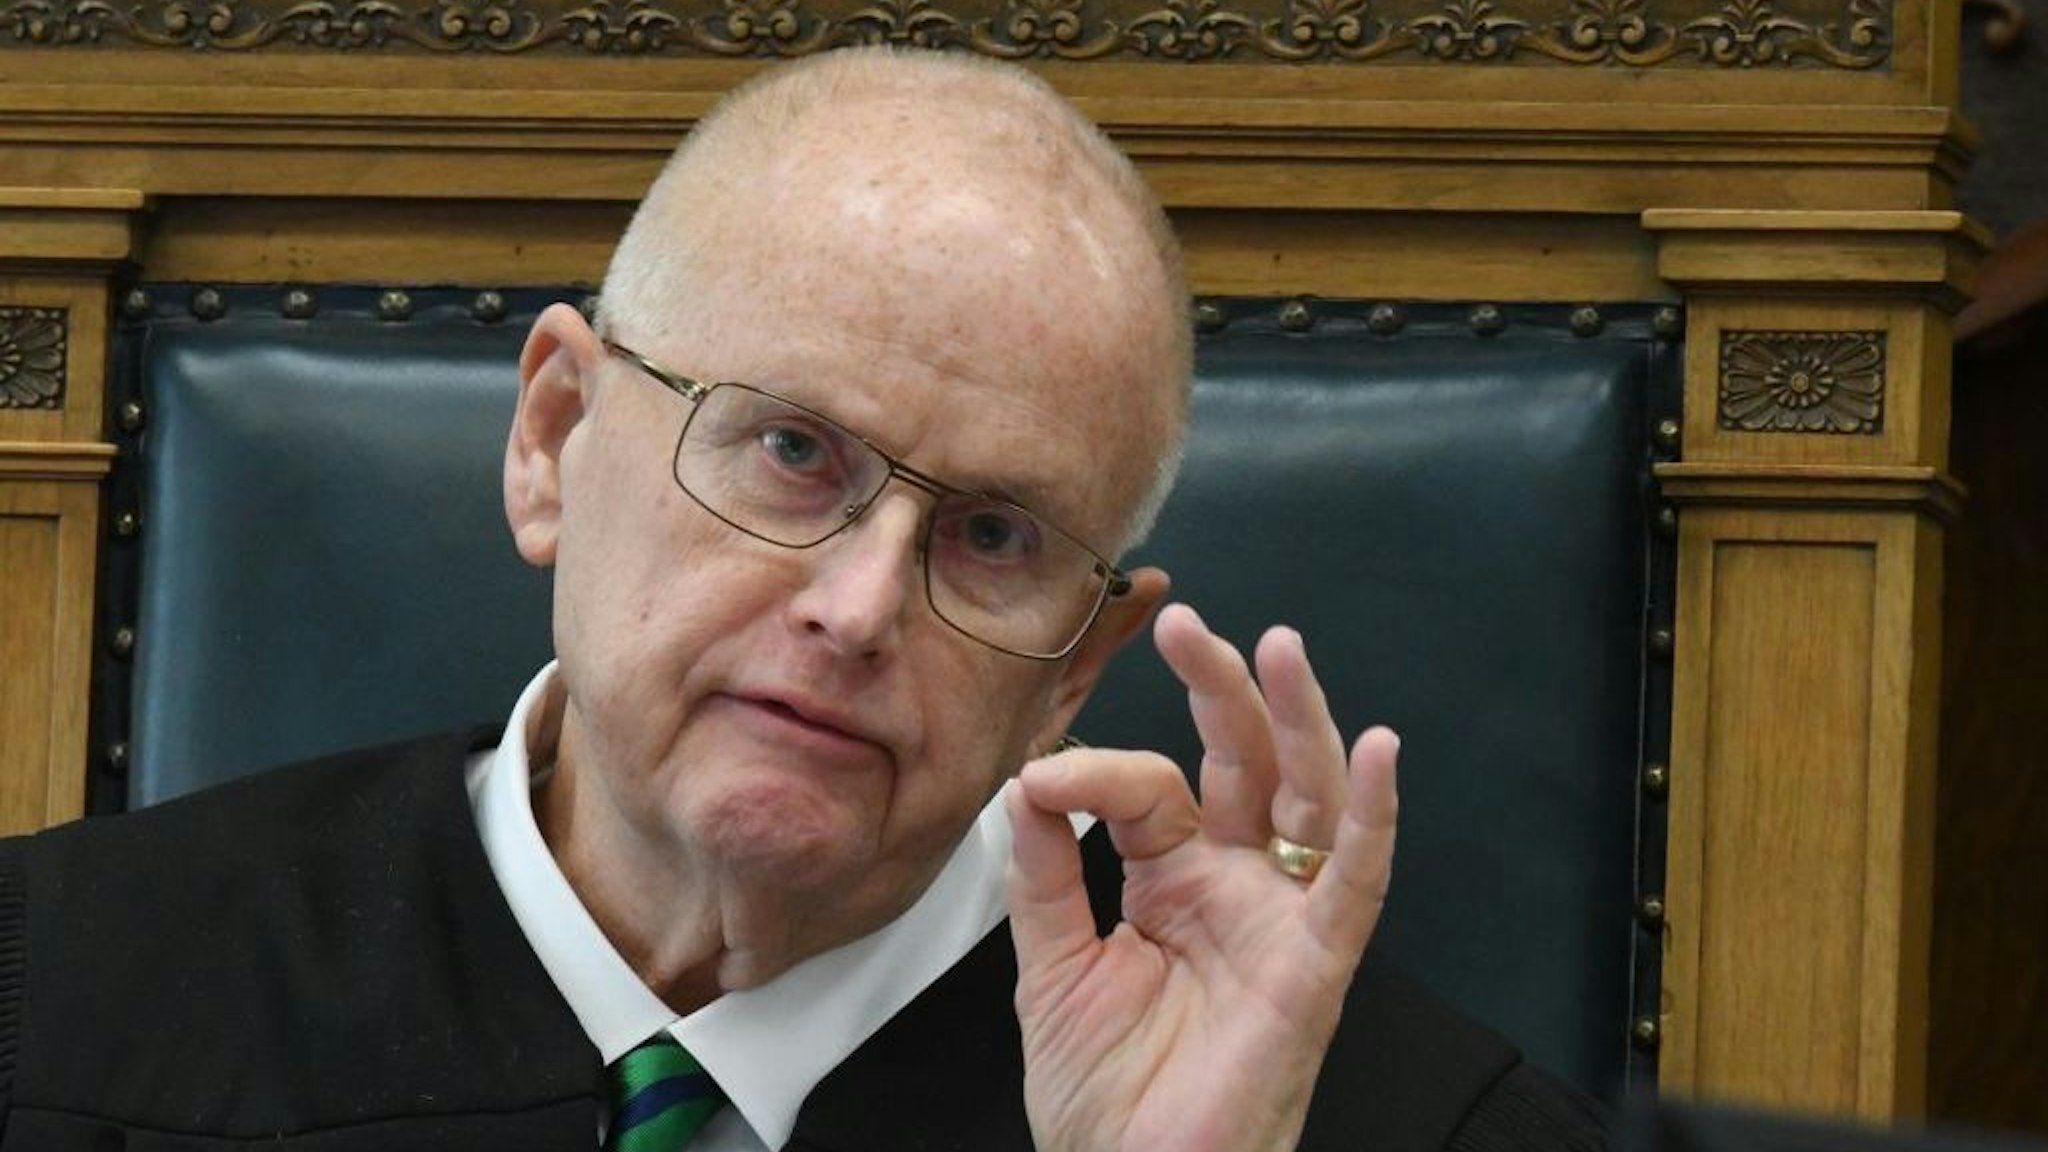 KENOSHA, WISCONSIN - NOVEMBER 05: Circuit Court Judge BRUCE E. SCHROEDER consults law books as an evidentiary question is considered outside of the presence of the jury at the start of the afternoon session in the trial of Kyle Rittenhouse on November 5, 2021 in Kenosha, Wisconsin. Rittenhouse is accused of shooting three demonstrators, killing two of them, during a night of unrest that erupted in Kenosha after a police officer shot Jacob Blake seven times in the back while being arrested in August 2020. Rittenhouse, from Antioch, Illinois, was 17 at the time of the shooting and armed with an assault rifle. He faces counts of felony homicide and felony attempted homicide. (Photo by Mark Hertzberg-Pool/Getty Images)